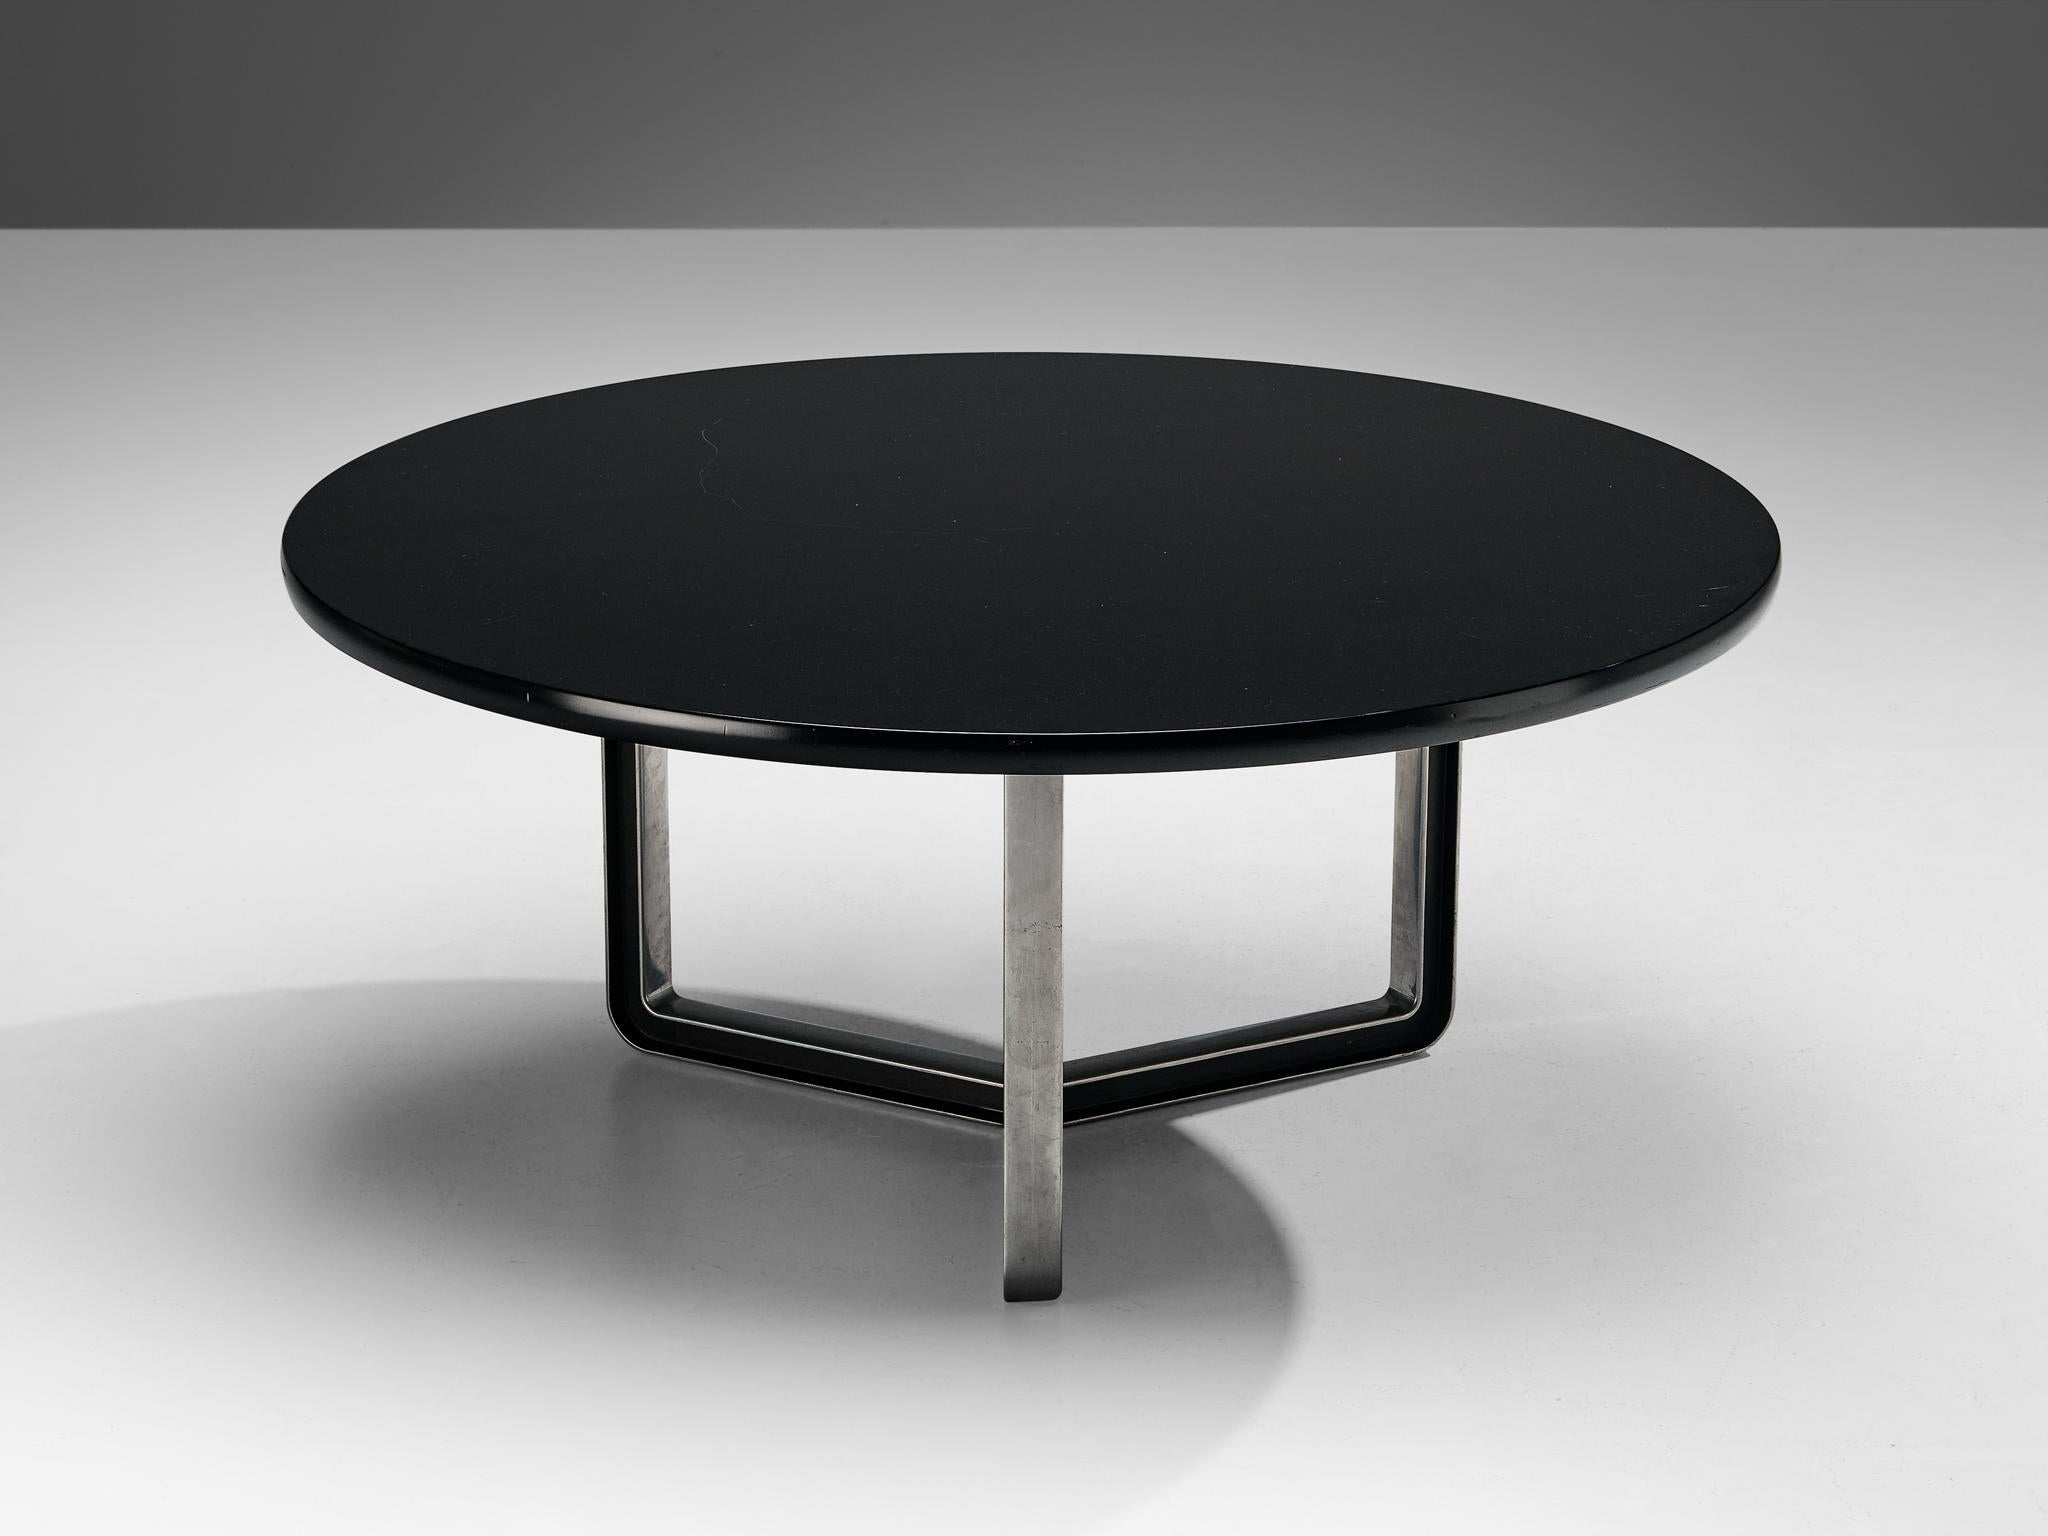 Centro Progetti Tecno, dining table model 'T334C', lacquered wood, aluminum, Italy, 1975-1978

Round dining table with a black lacquered wooden top that has an incredibly soft texture. The tabletop is mounted on a three-legged metal frame in